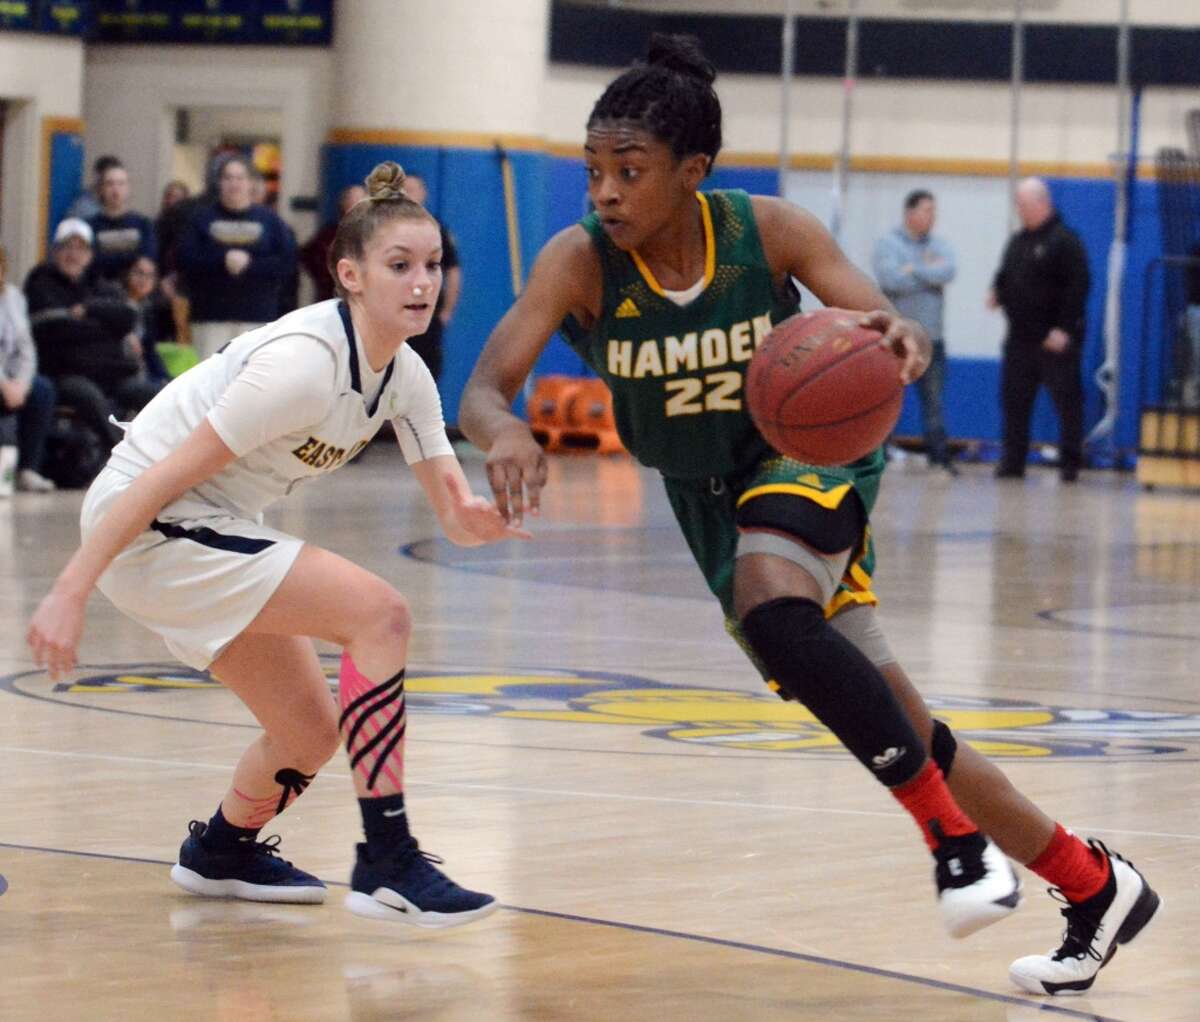 Hamden’s Taniyah Thompson drives past East Haven’s Makenzie Helms during a girls basketball game on Jan. 23, 2019 in East Haven, Conn. East Haven and Hamden are the top two seeds in the SCC Girls Basketball Tournament, which begins Thursday, Feb. 14.